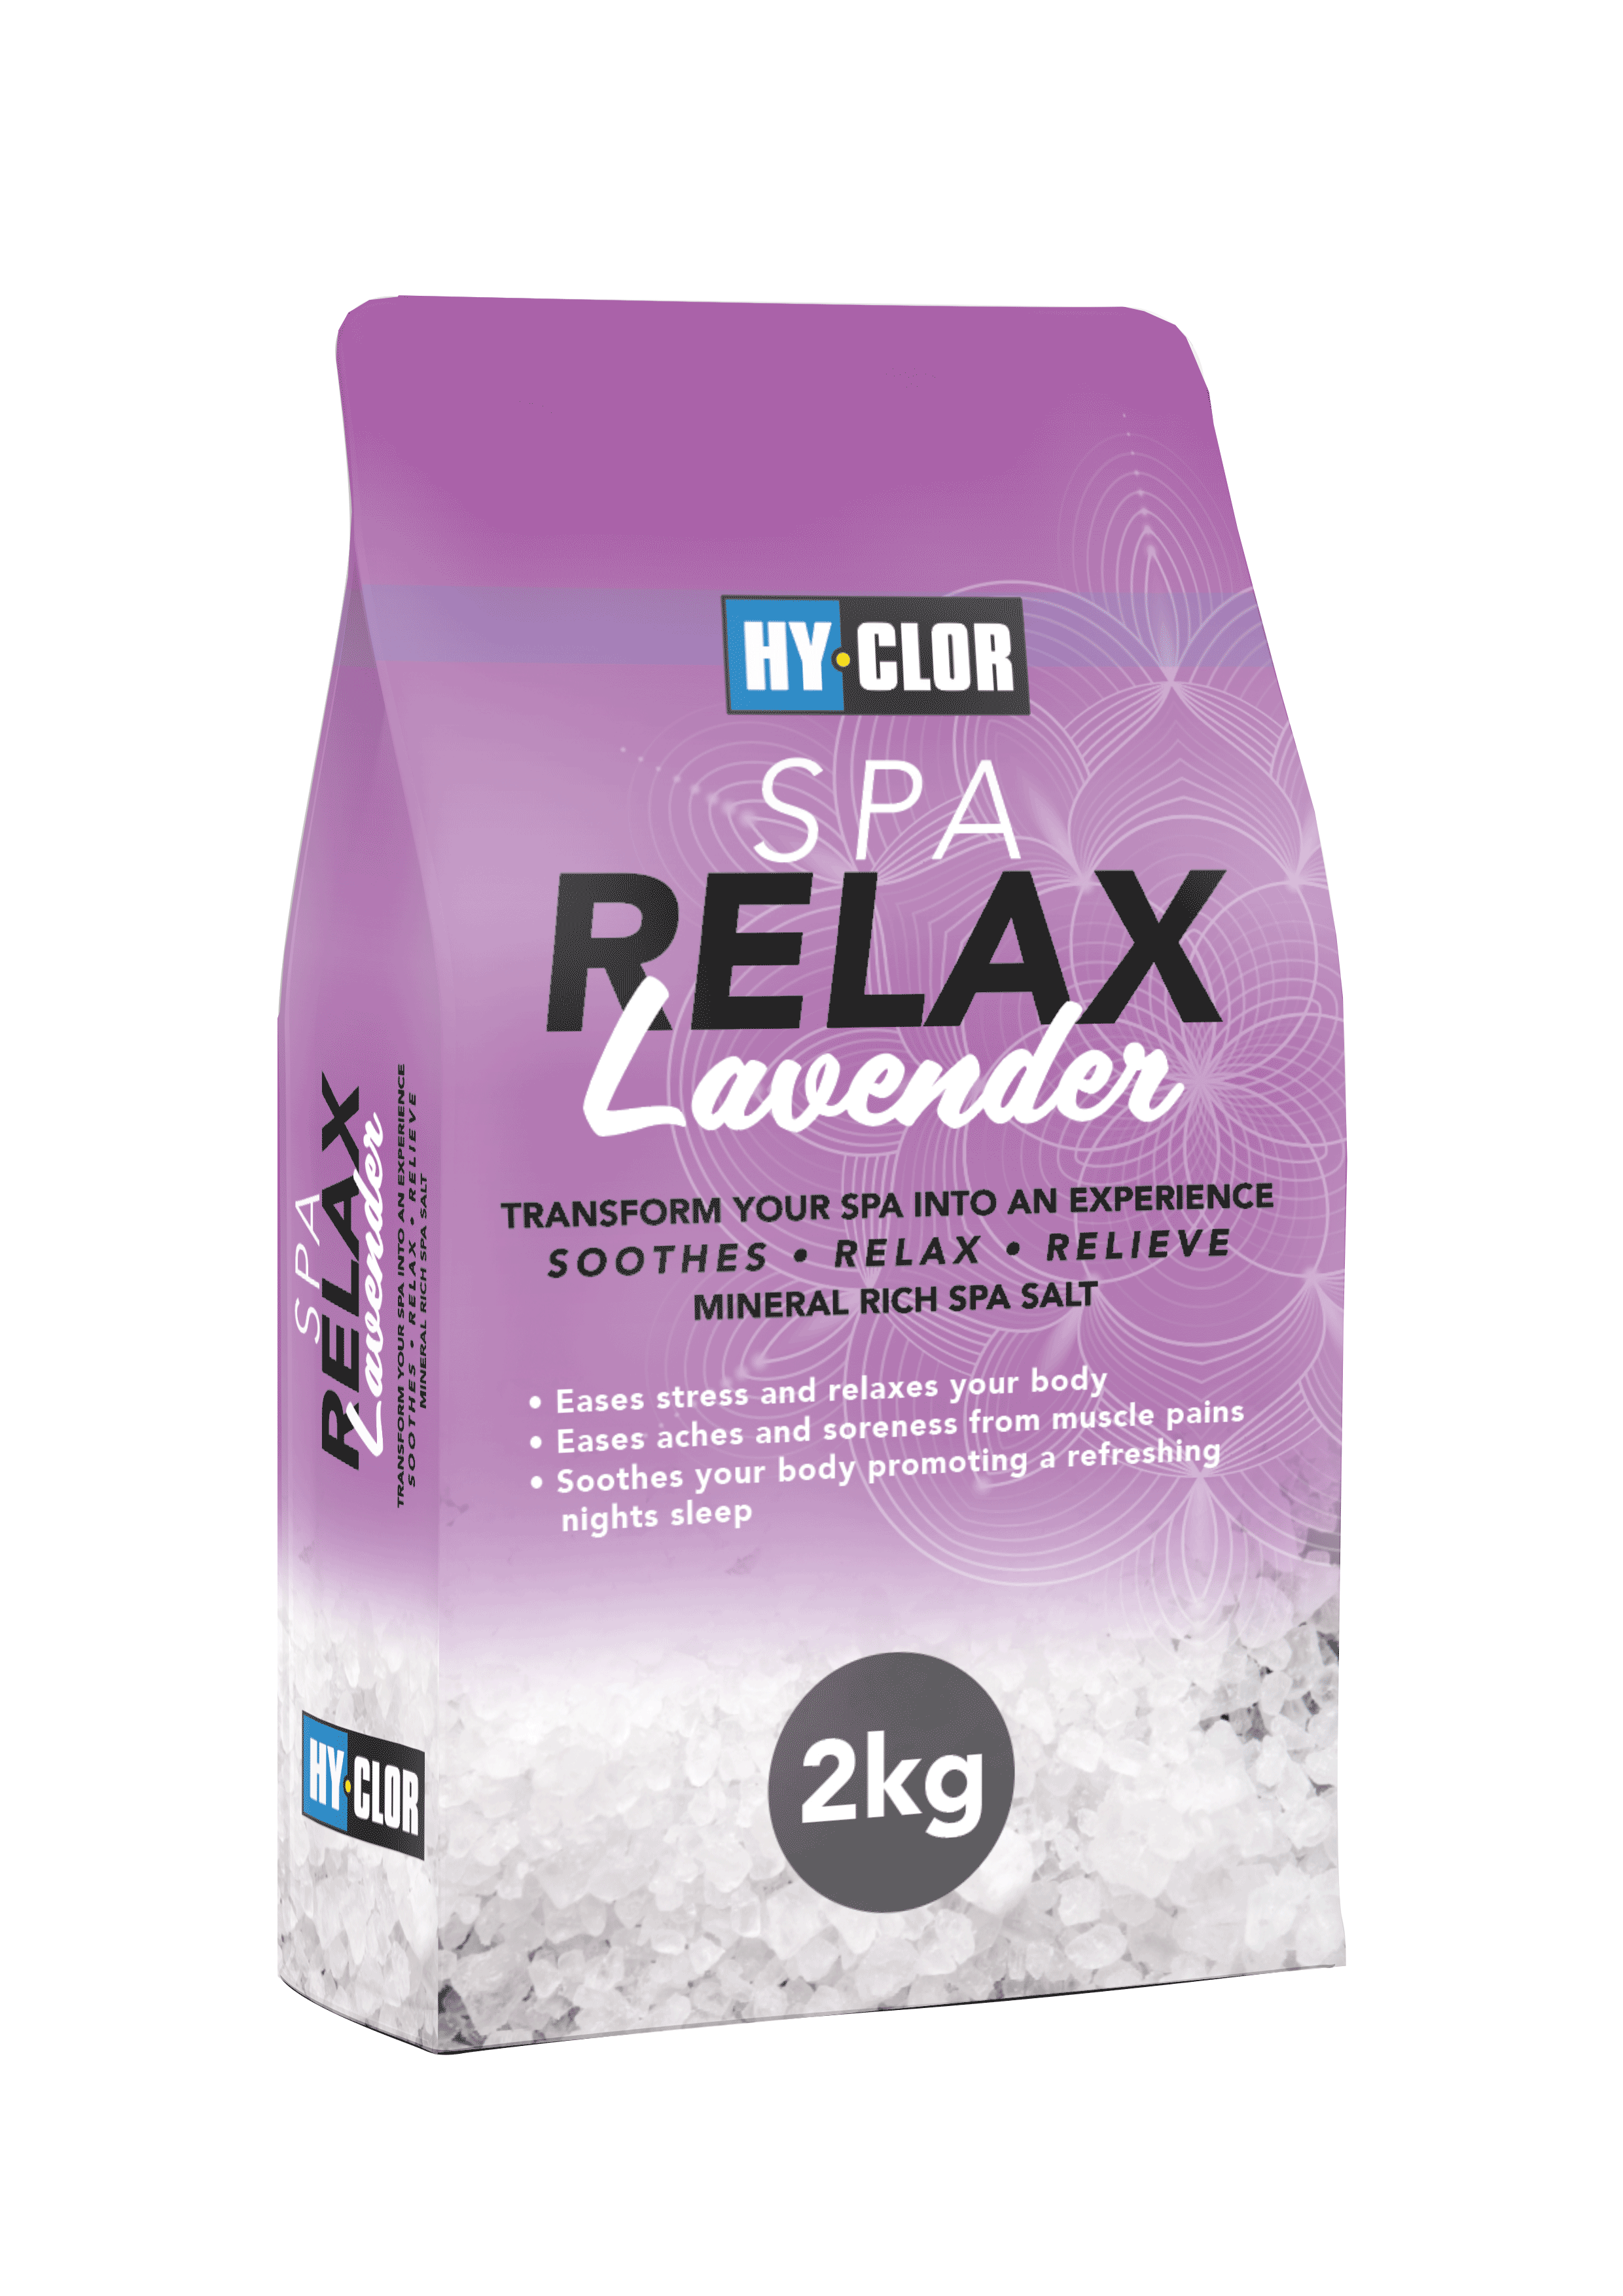 SPA RELAX Lavender